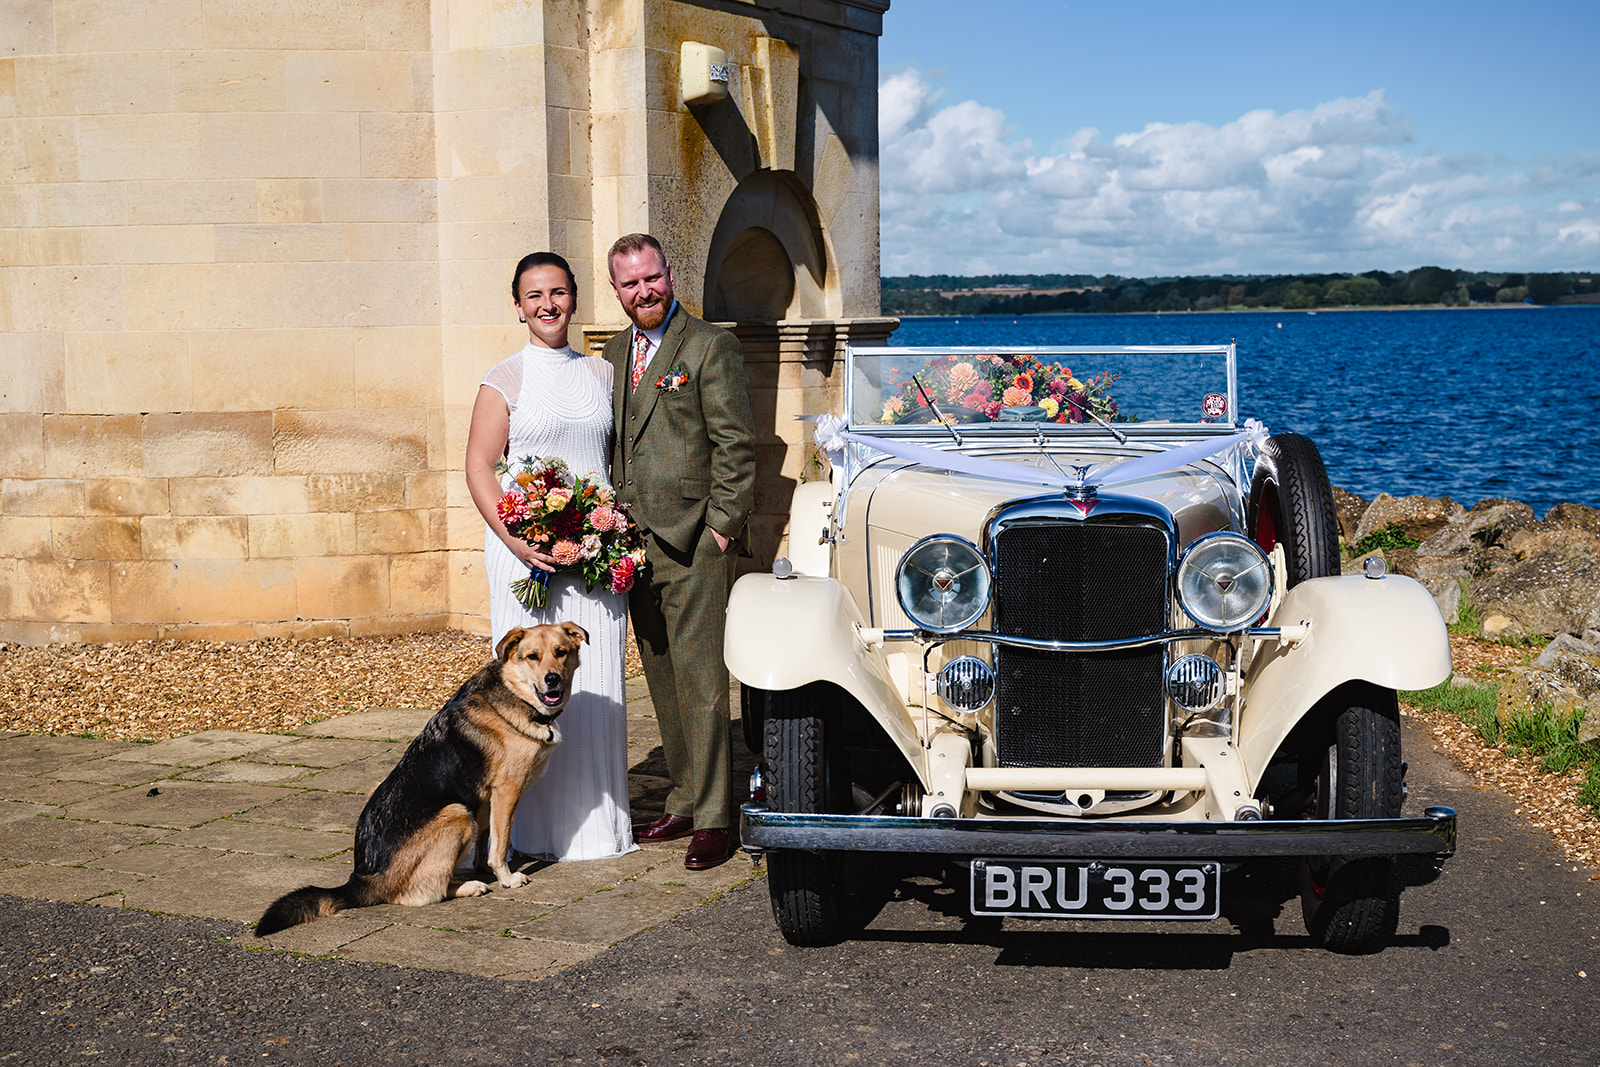 Bride and groom with their dog and wedding car at normanton church rutland water